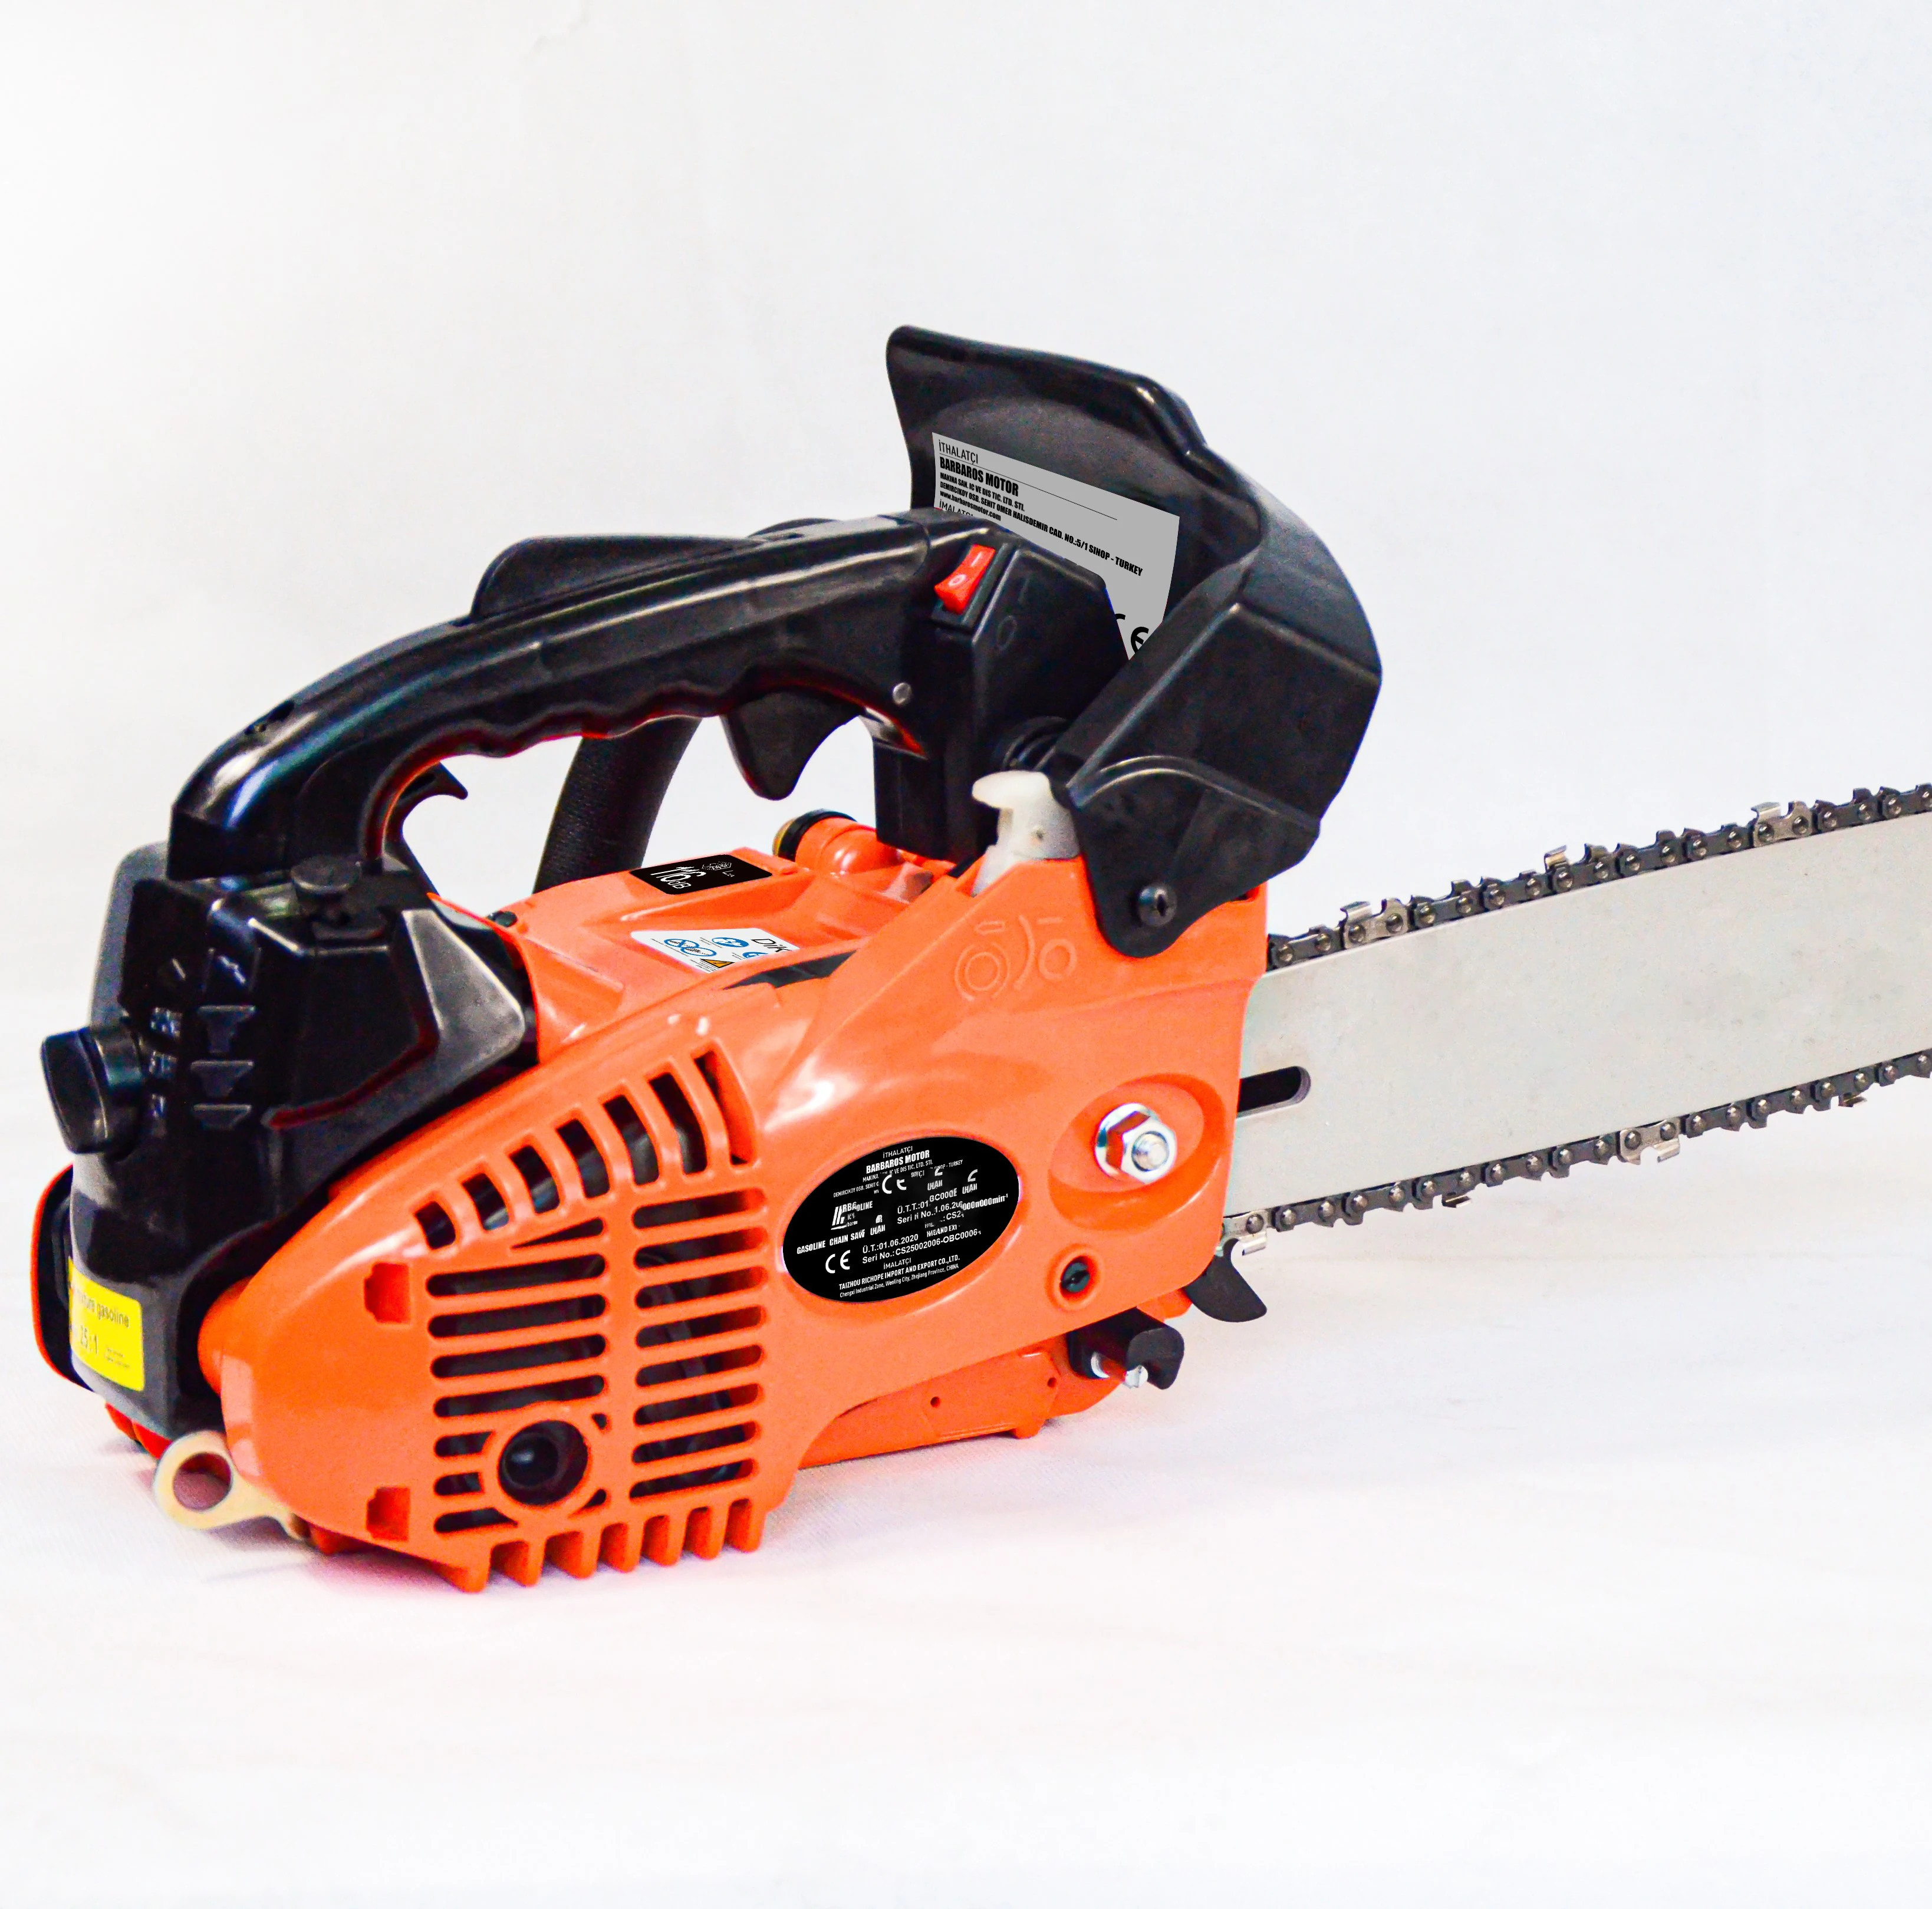 Continent Improvement Favor Garden Field Hot Sale High Quality Gasoline Echo Chainsaw - Buy Garden  Field Echo Chainsaw,Hot Sale High Quality Gasoline Echo Chainsaw,Gasoline Echo  Chainsaw Product on Alibaba.com